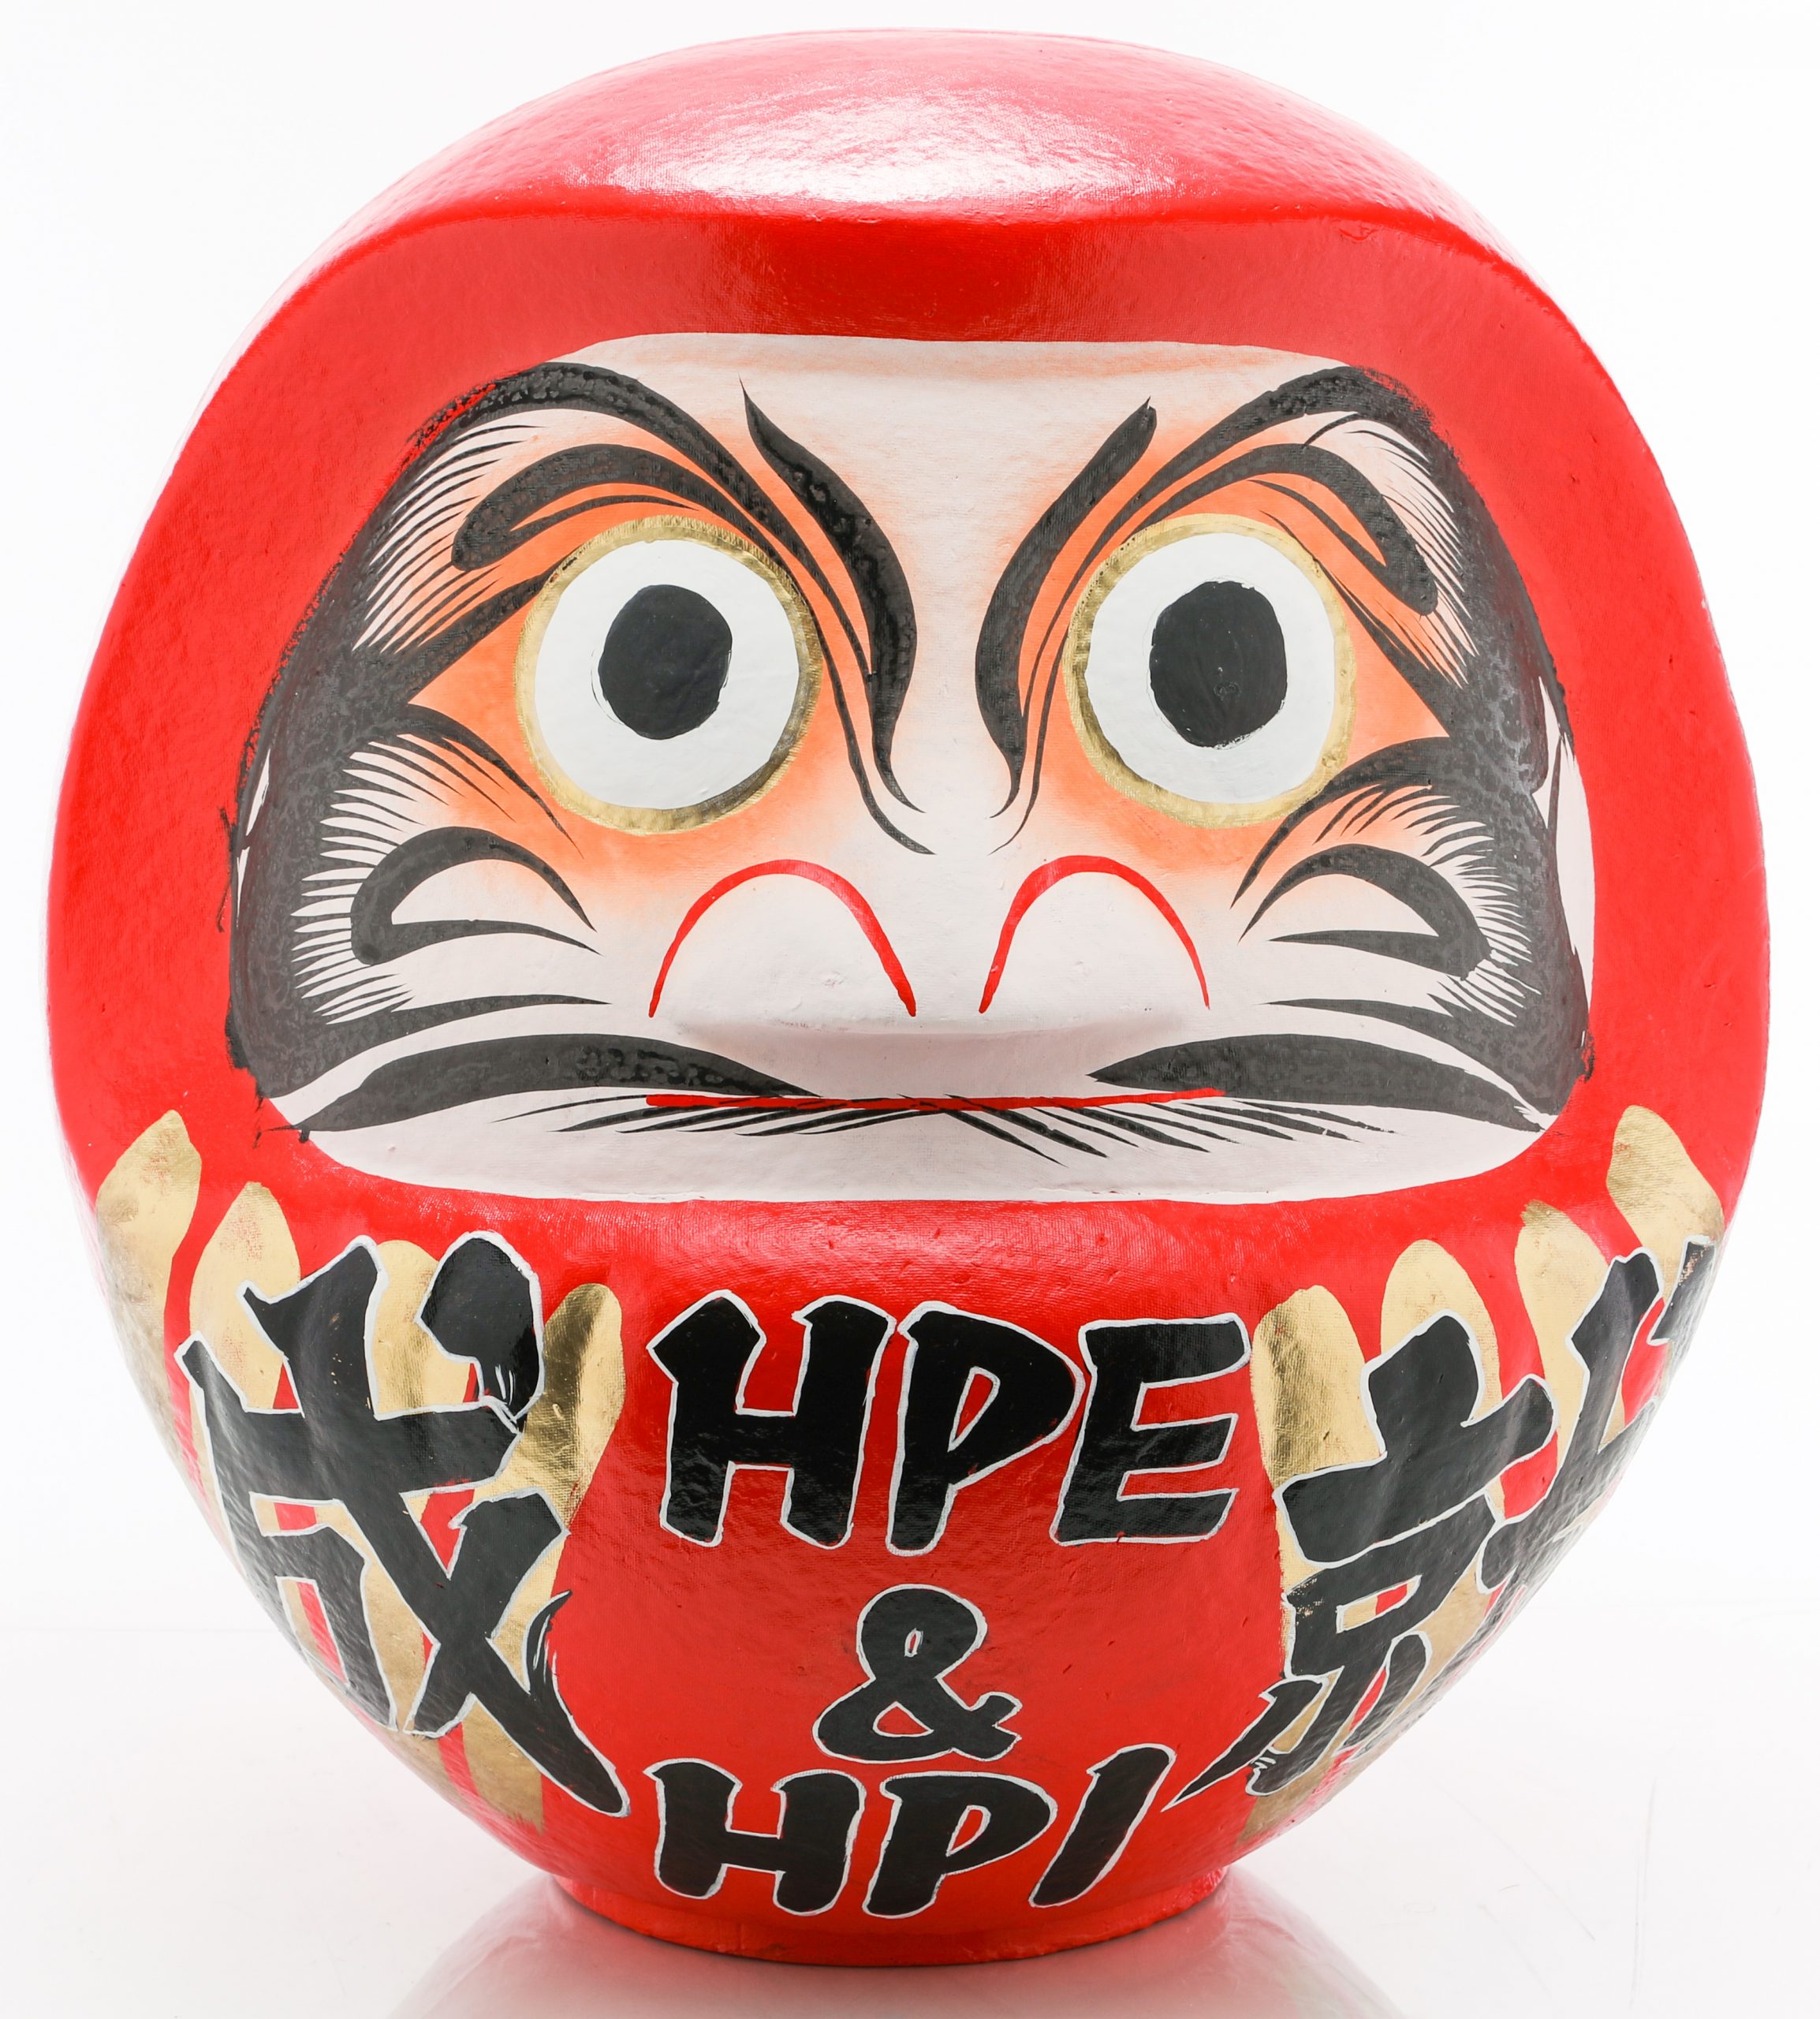 A red Daruma doll with eyes open and HPE & HPI written on the bottom half.